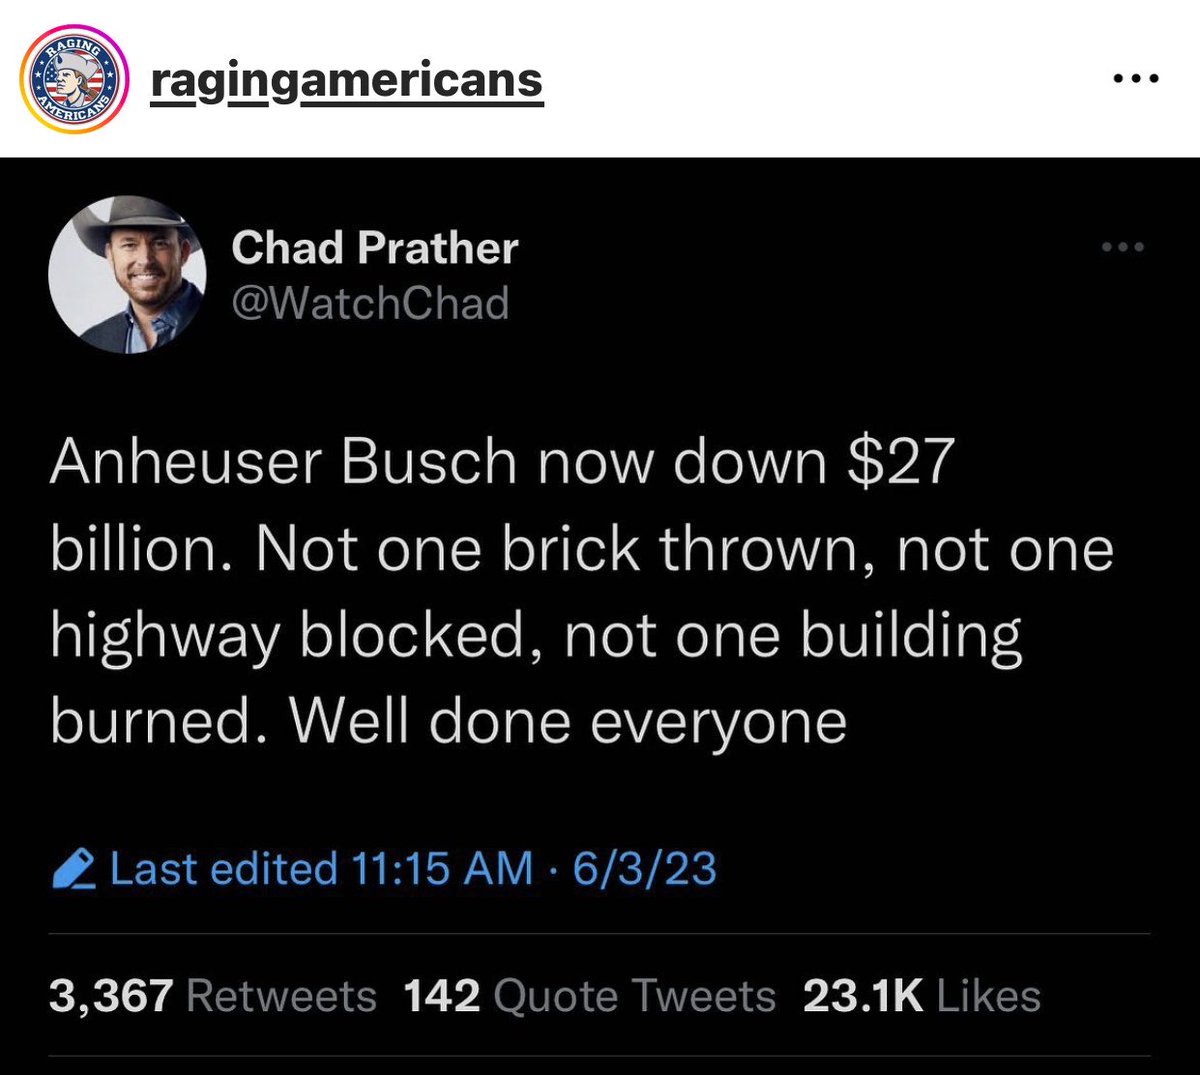 Anheuser Busch now down $27 billion. Not one brick thrown, not one highway blocked, not one building burned. Well done everyone.